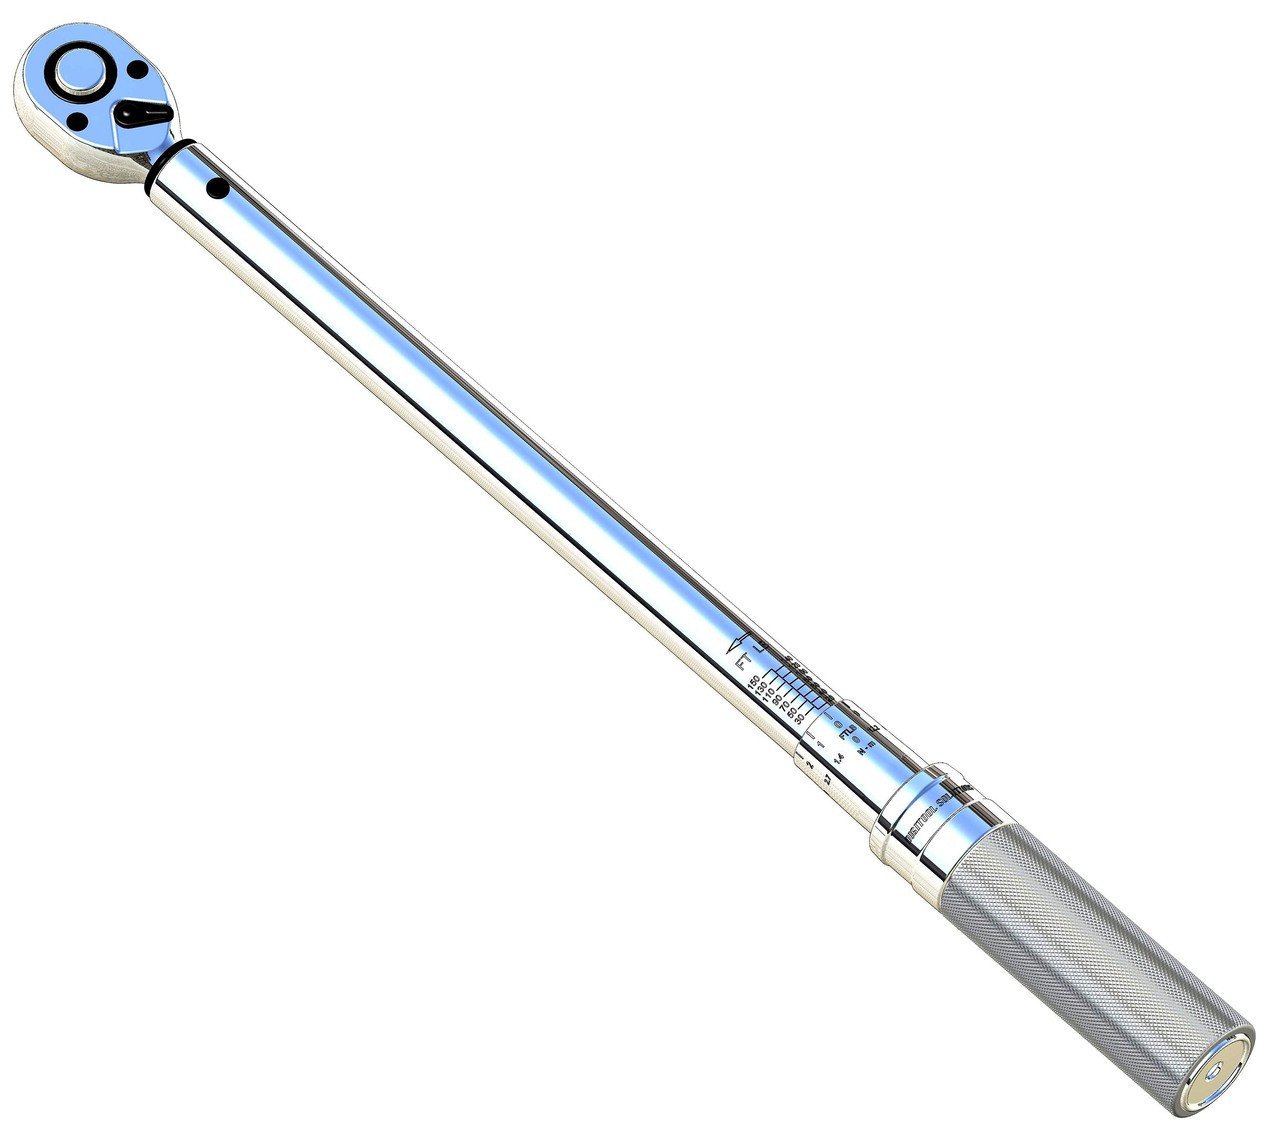 1/4" Dr 30-250 In Lbs / 3.4-28.2 Nm Digitool Adj Torque Wrench - C-2501-1